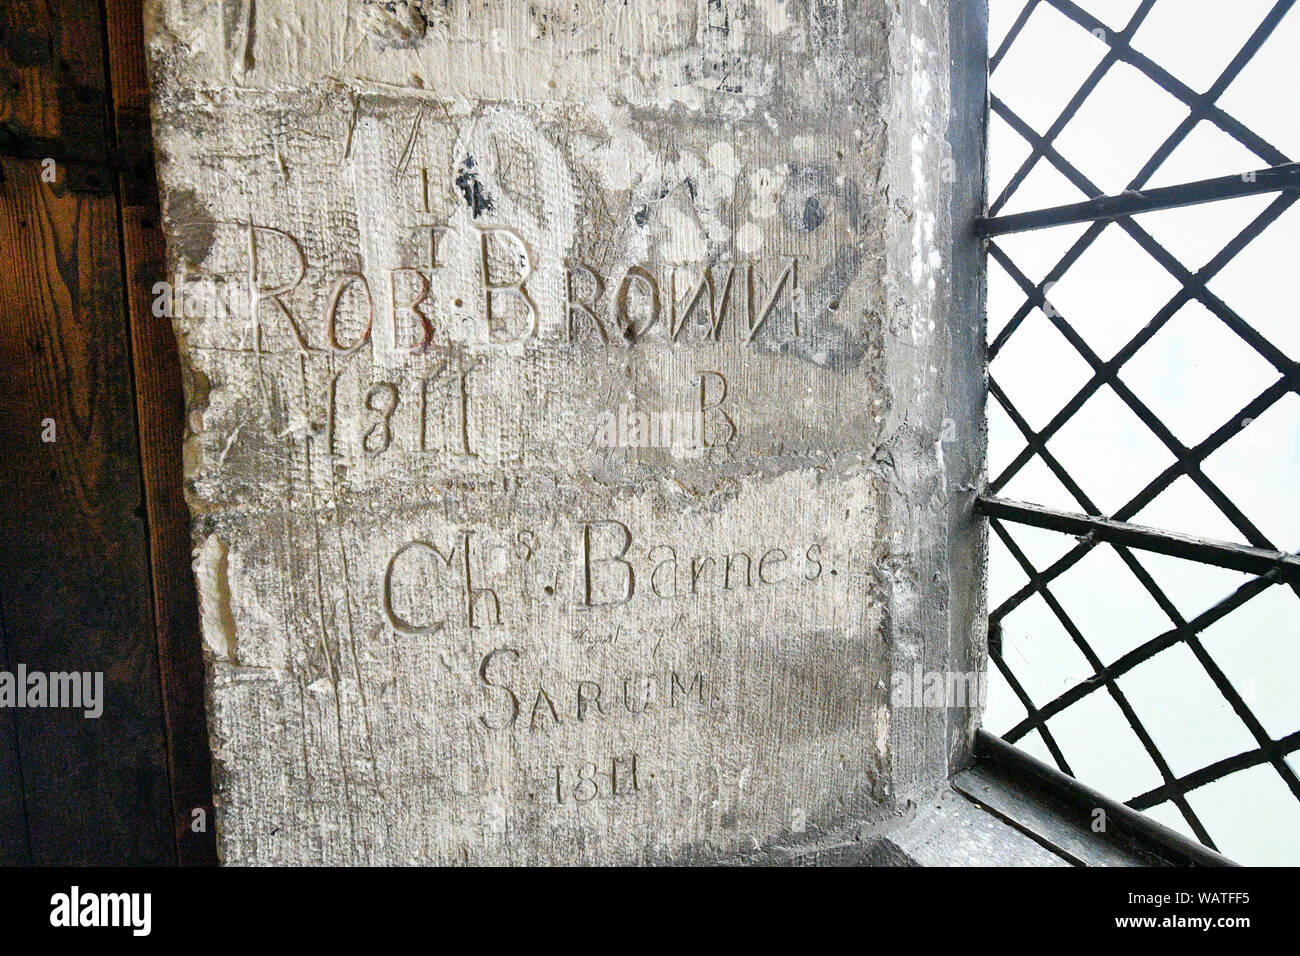 Graffiti scratched into an internal limestone wall, probably the work of two craftsmen, which can be seen during the Salisbury Cathedral Tower Tour, where visitors are guided up to the base of the 123 metre tall spire, climbing 332 mainly spiral steps, through the vaulted roof space, past medieval stained glass and through the inner workings of the 13th century cathedral. Stock Photo